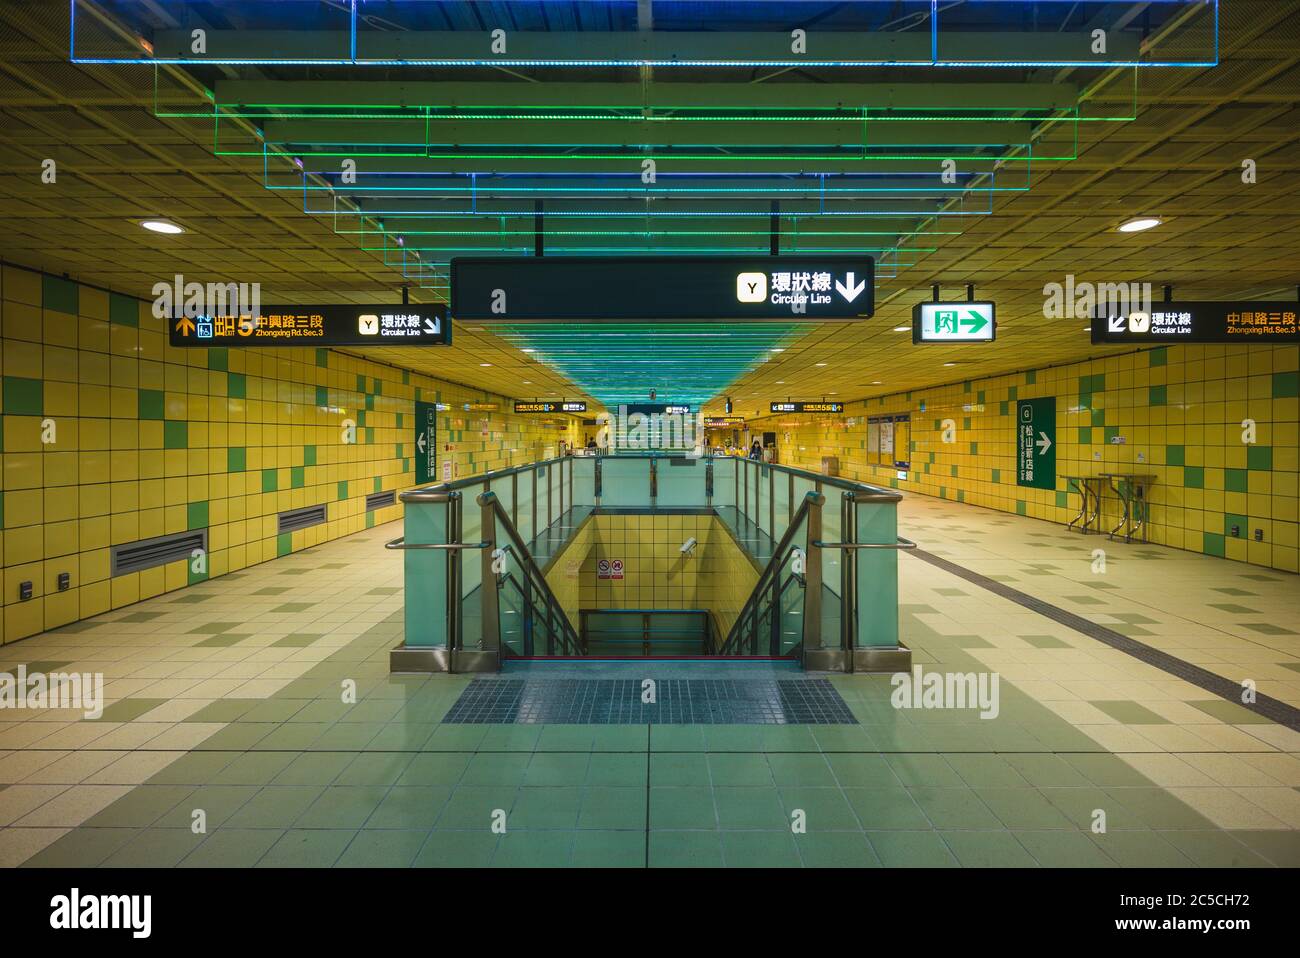 July 2nd, 2020: Dapinglin mrt station of taipei metro system located in xindian district, new taipei city, taiwan.  It is a transfer station between X Stock Photo